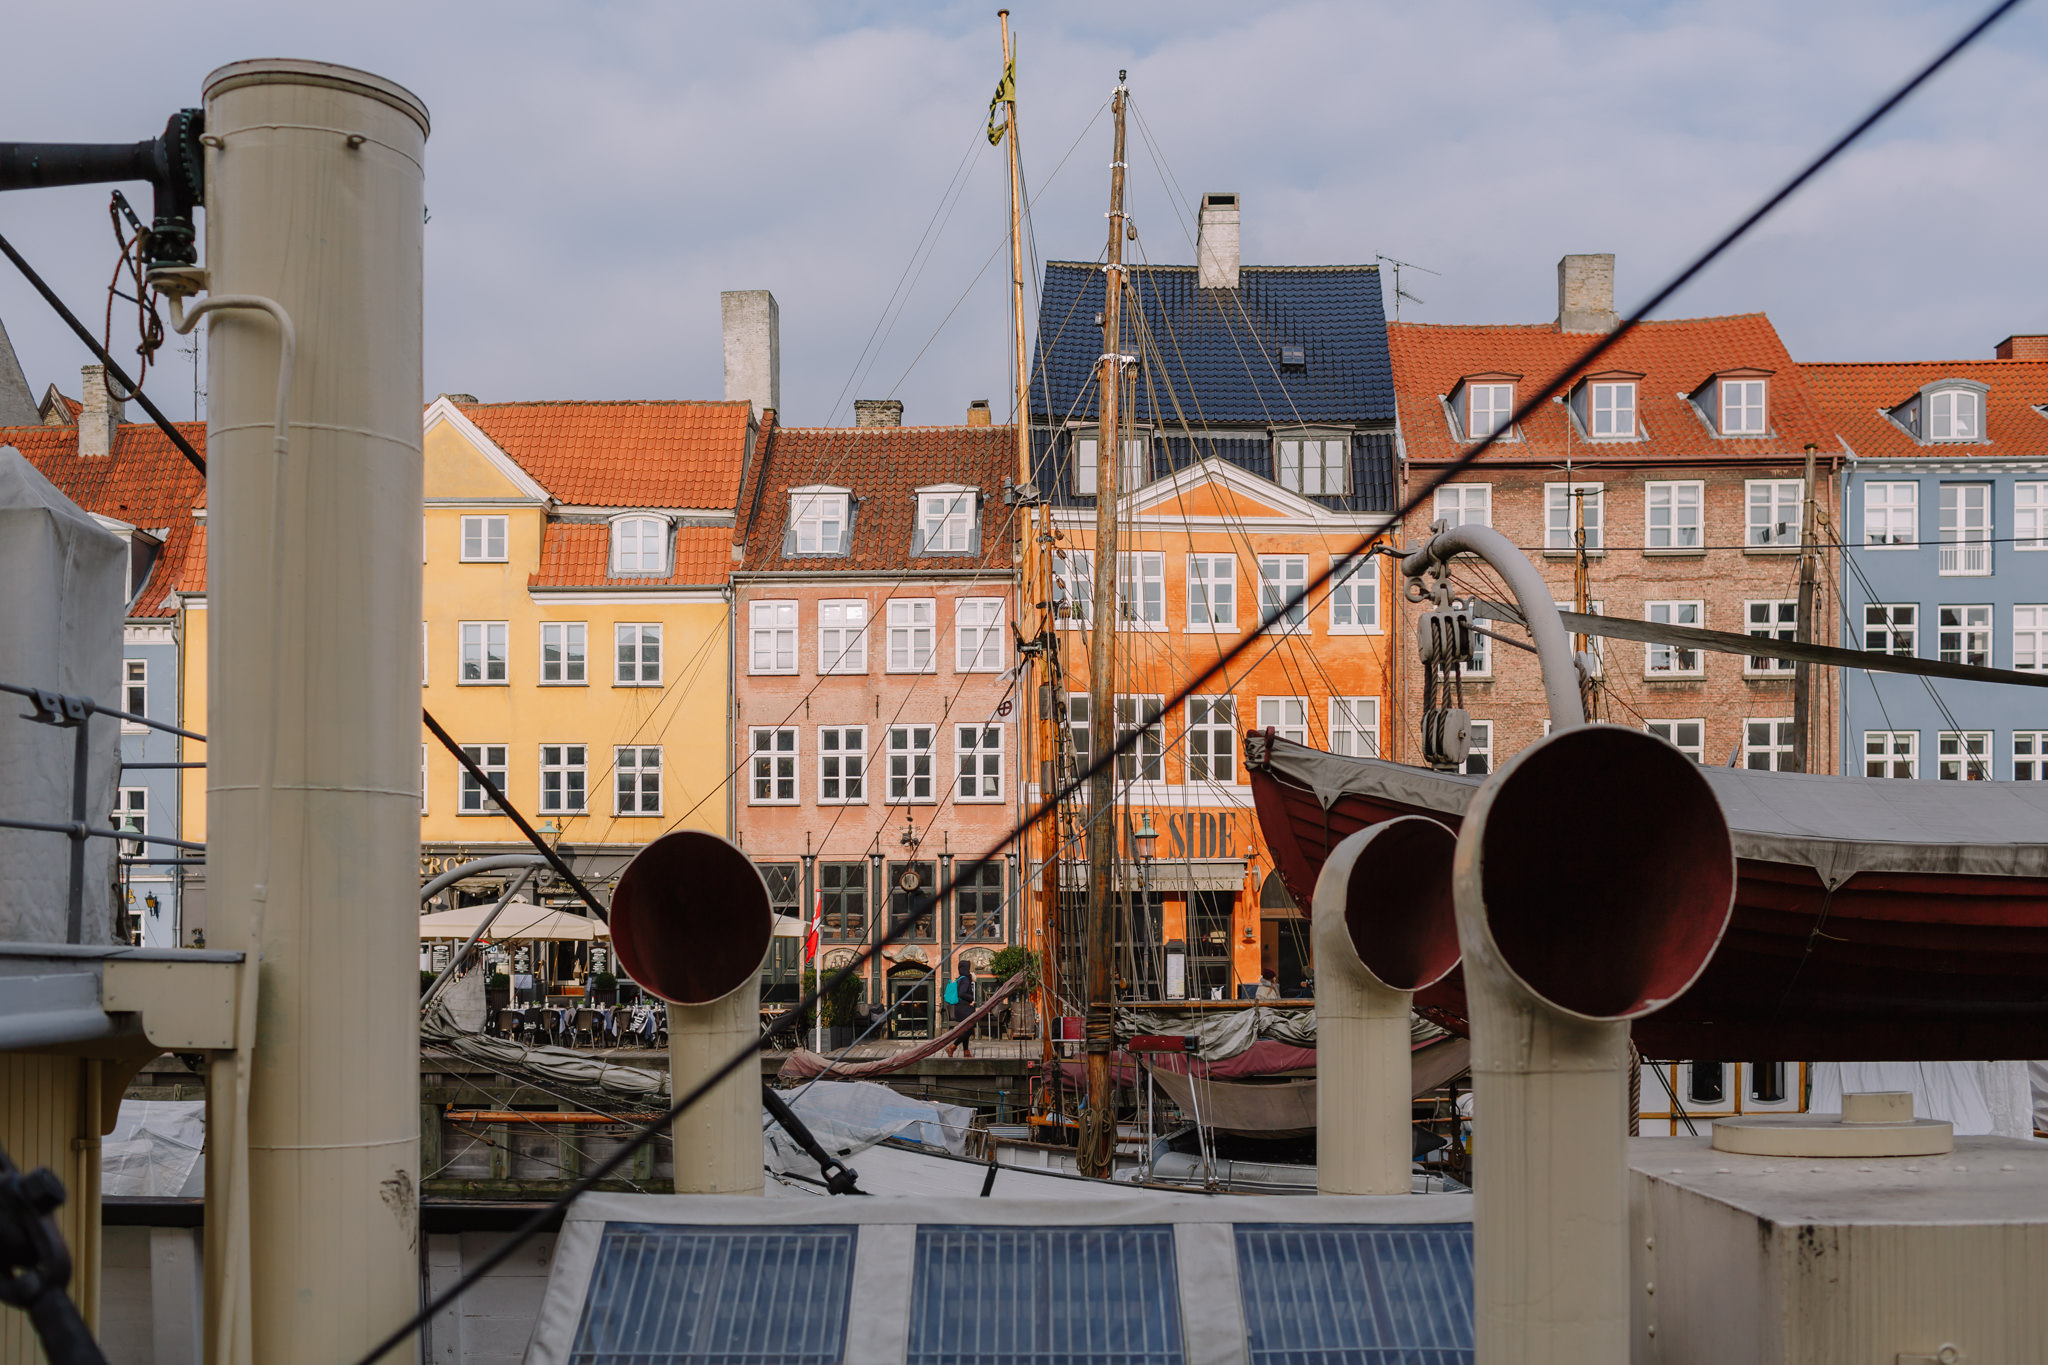 boat chimneys in front of tall colourful buildings in nyhavn